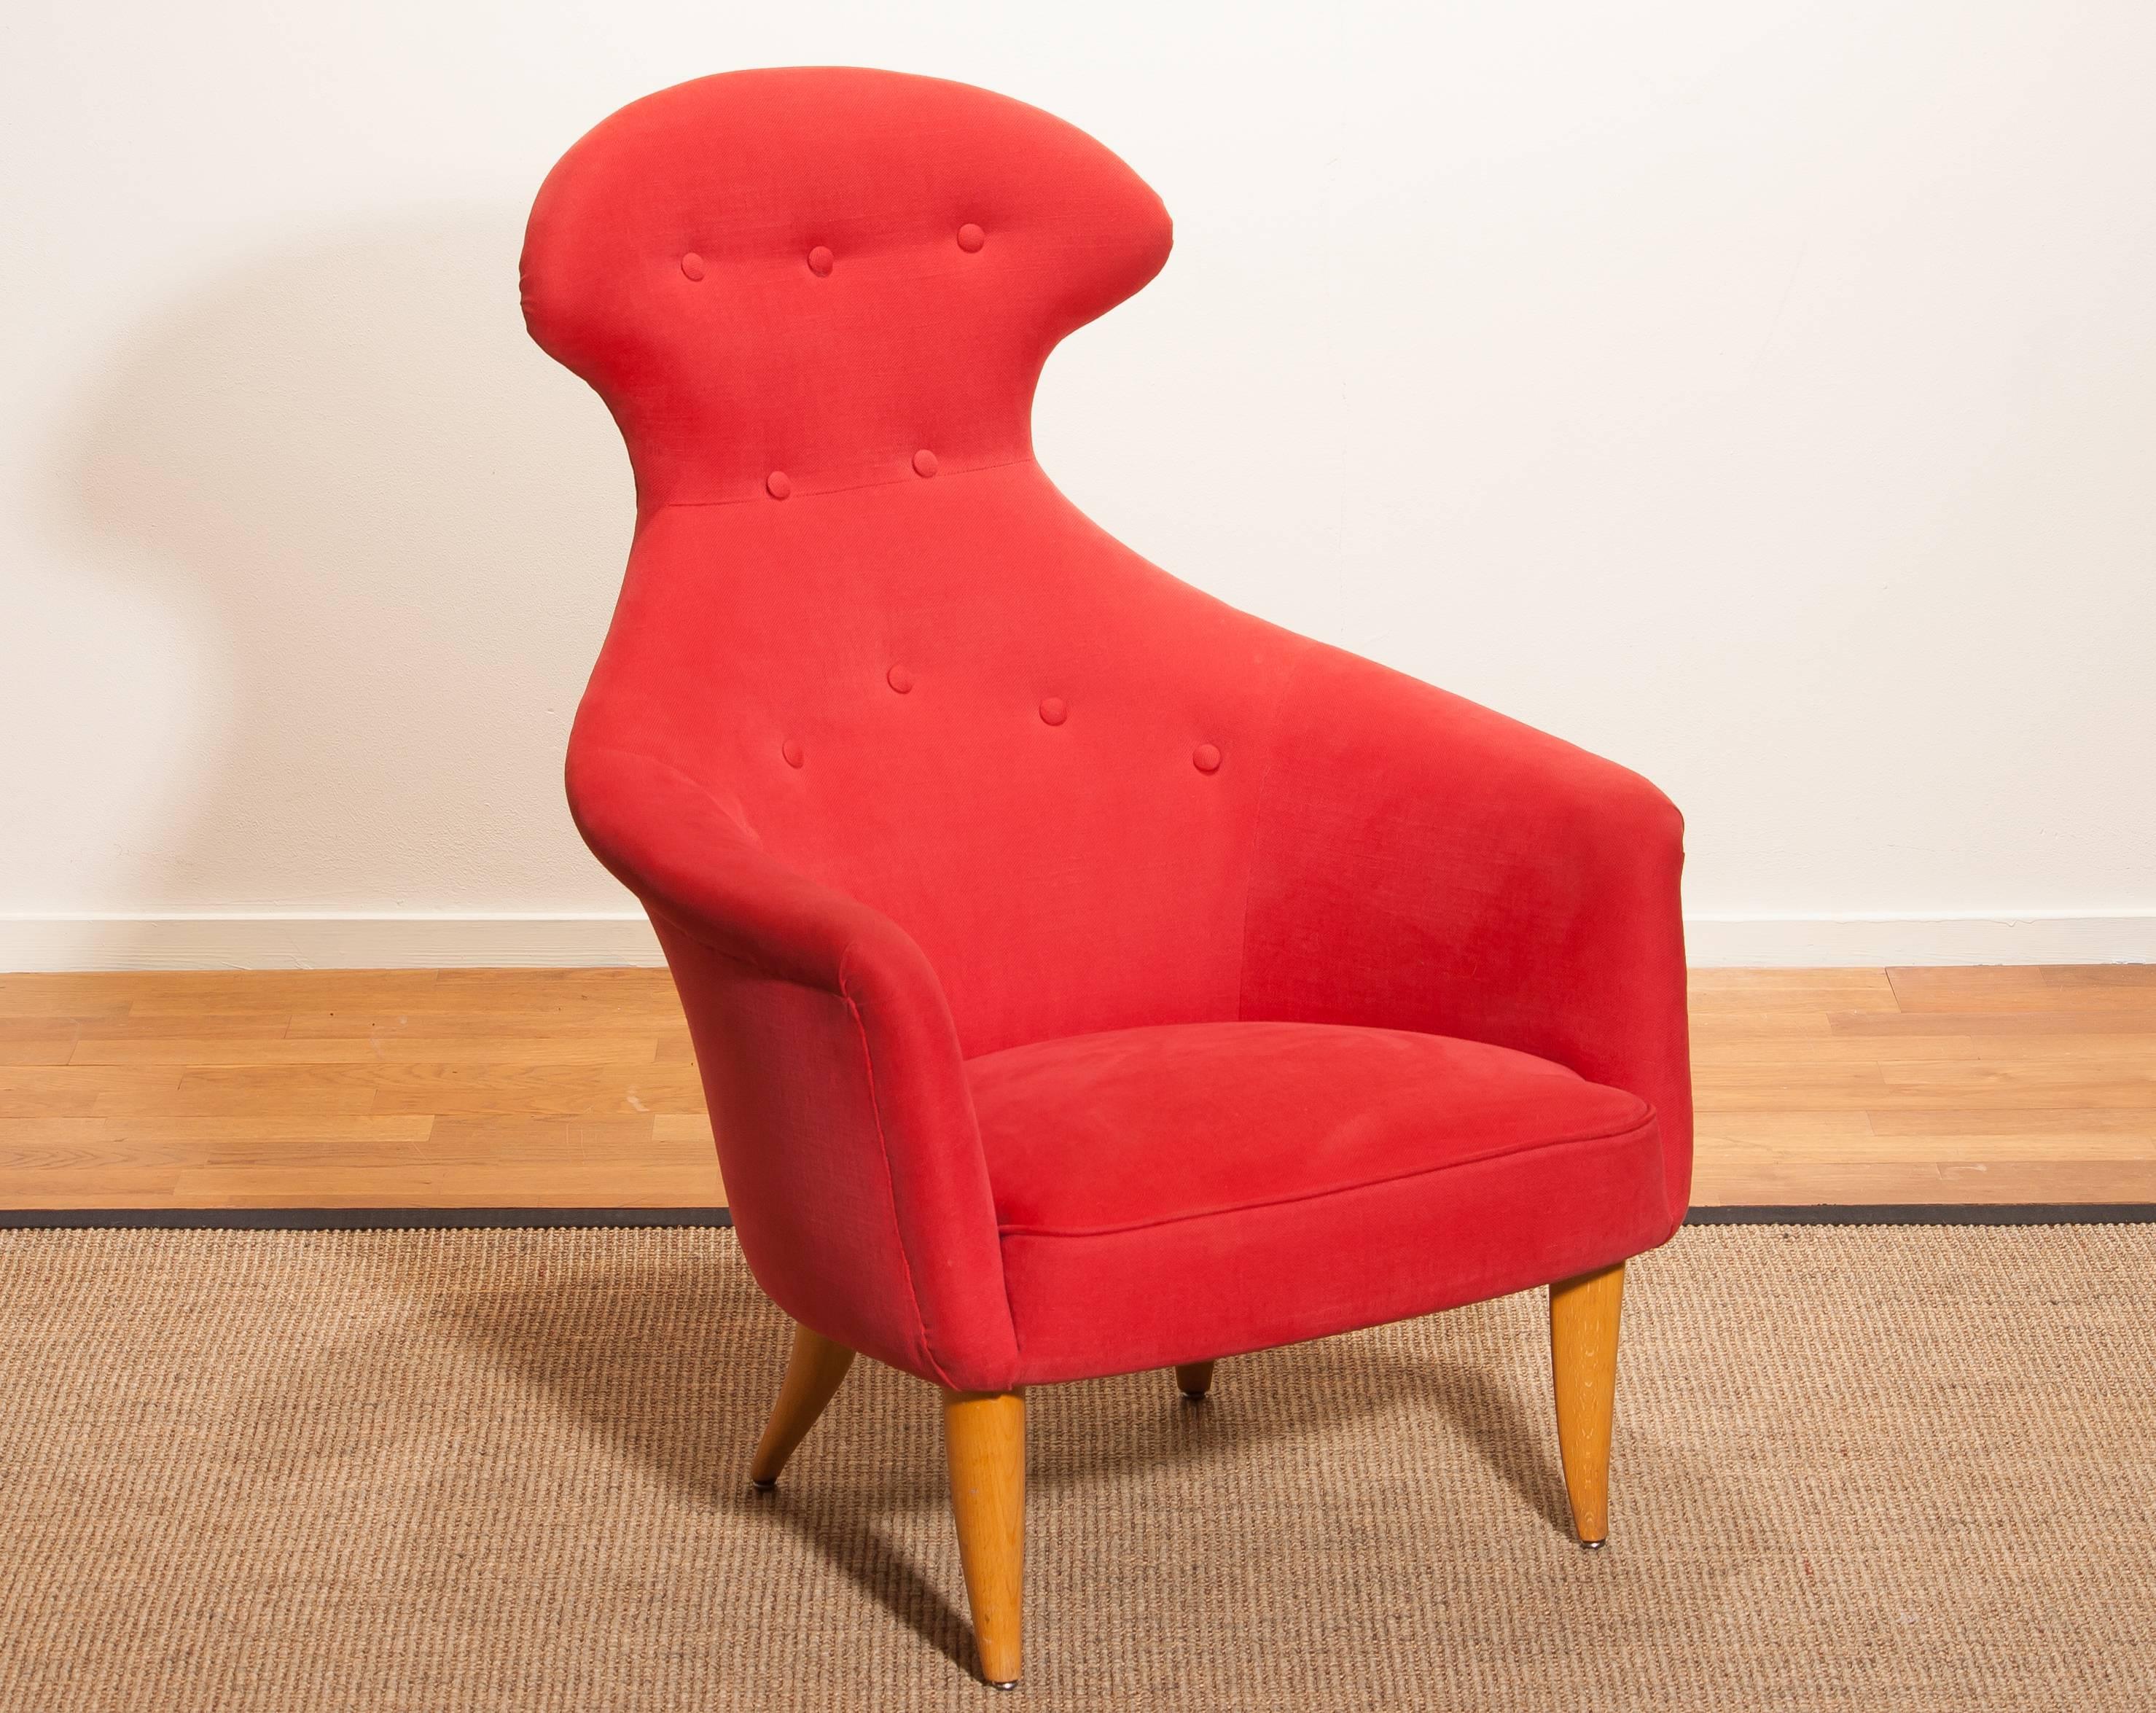 Beautiful armchair designed by Kerstin Hörlin-Holmquist.
The chair is produced by Nordiska Kompaniet.
This version is the 'Stora Eve' and is from a wooden frame with (newly upholstered ) red wool upholstering.
Period 1950-1959.
Dimensions: H 97